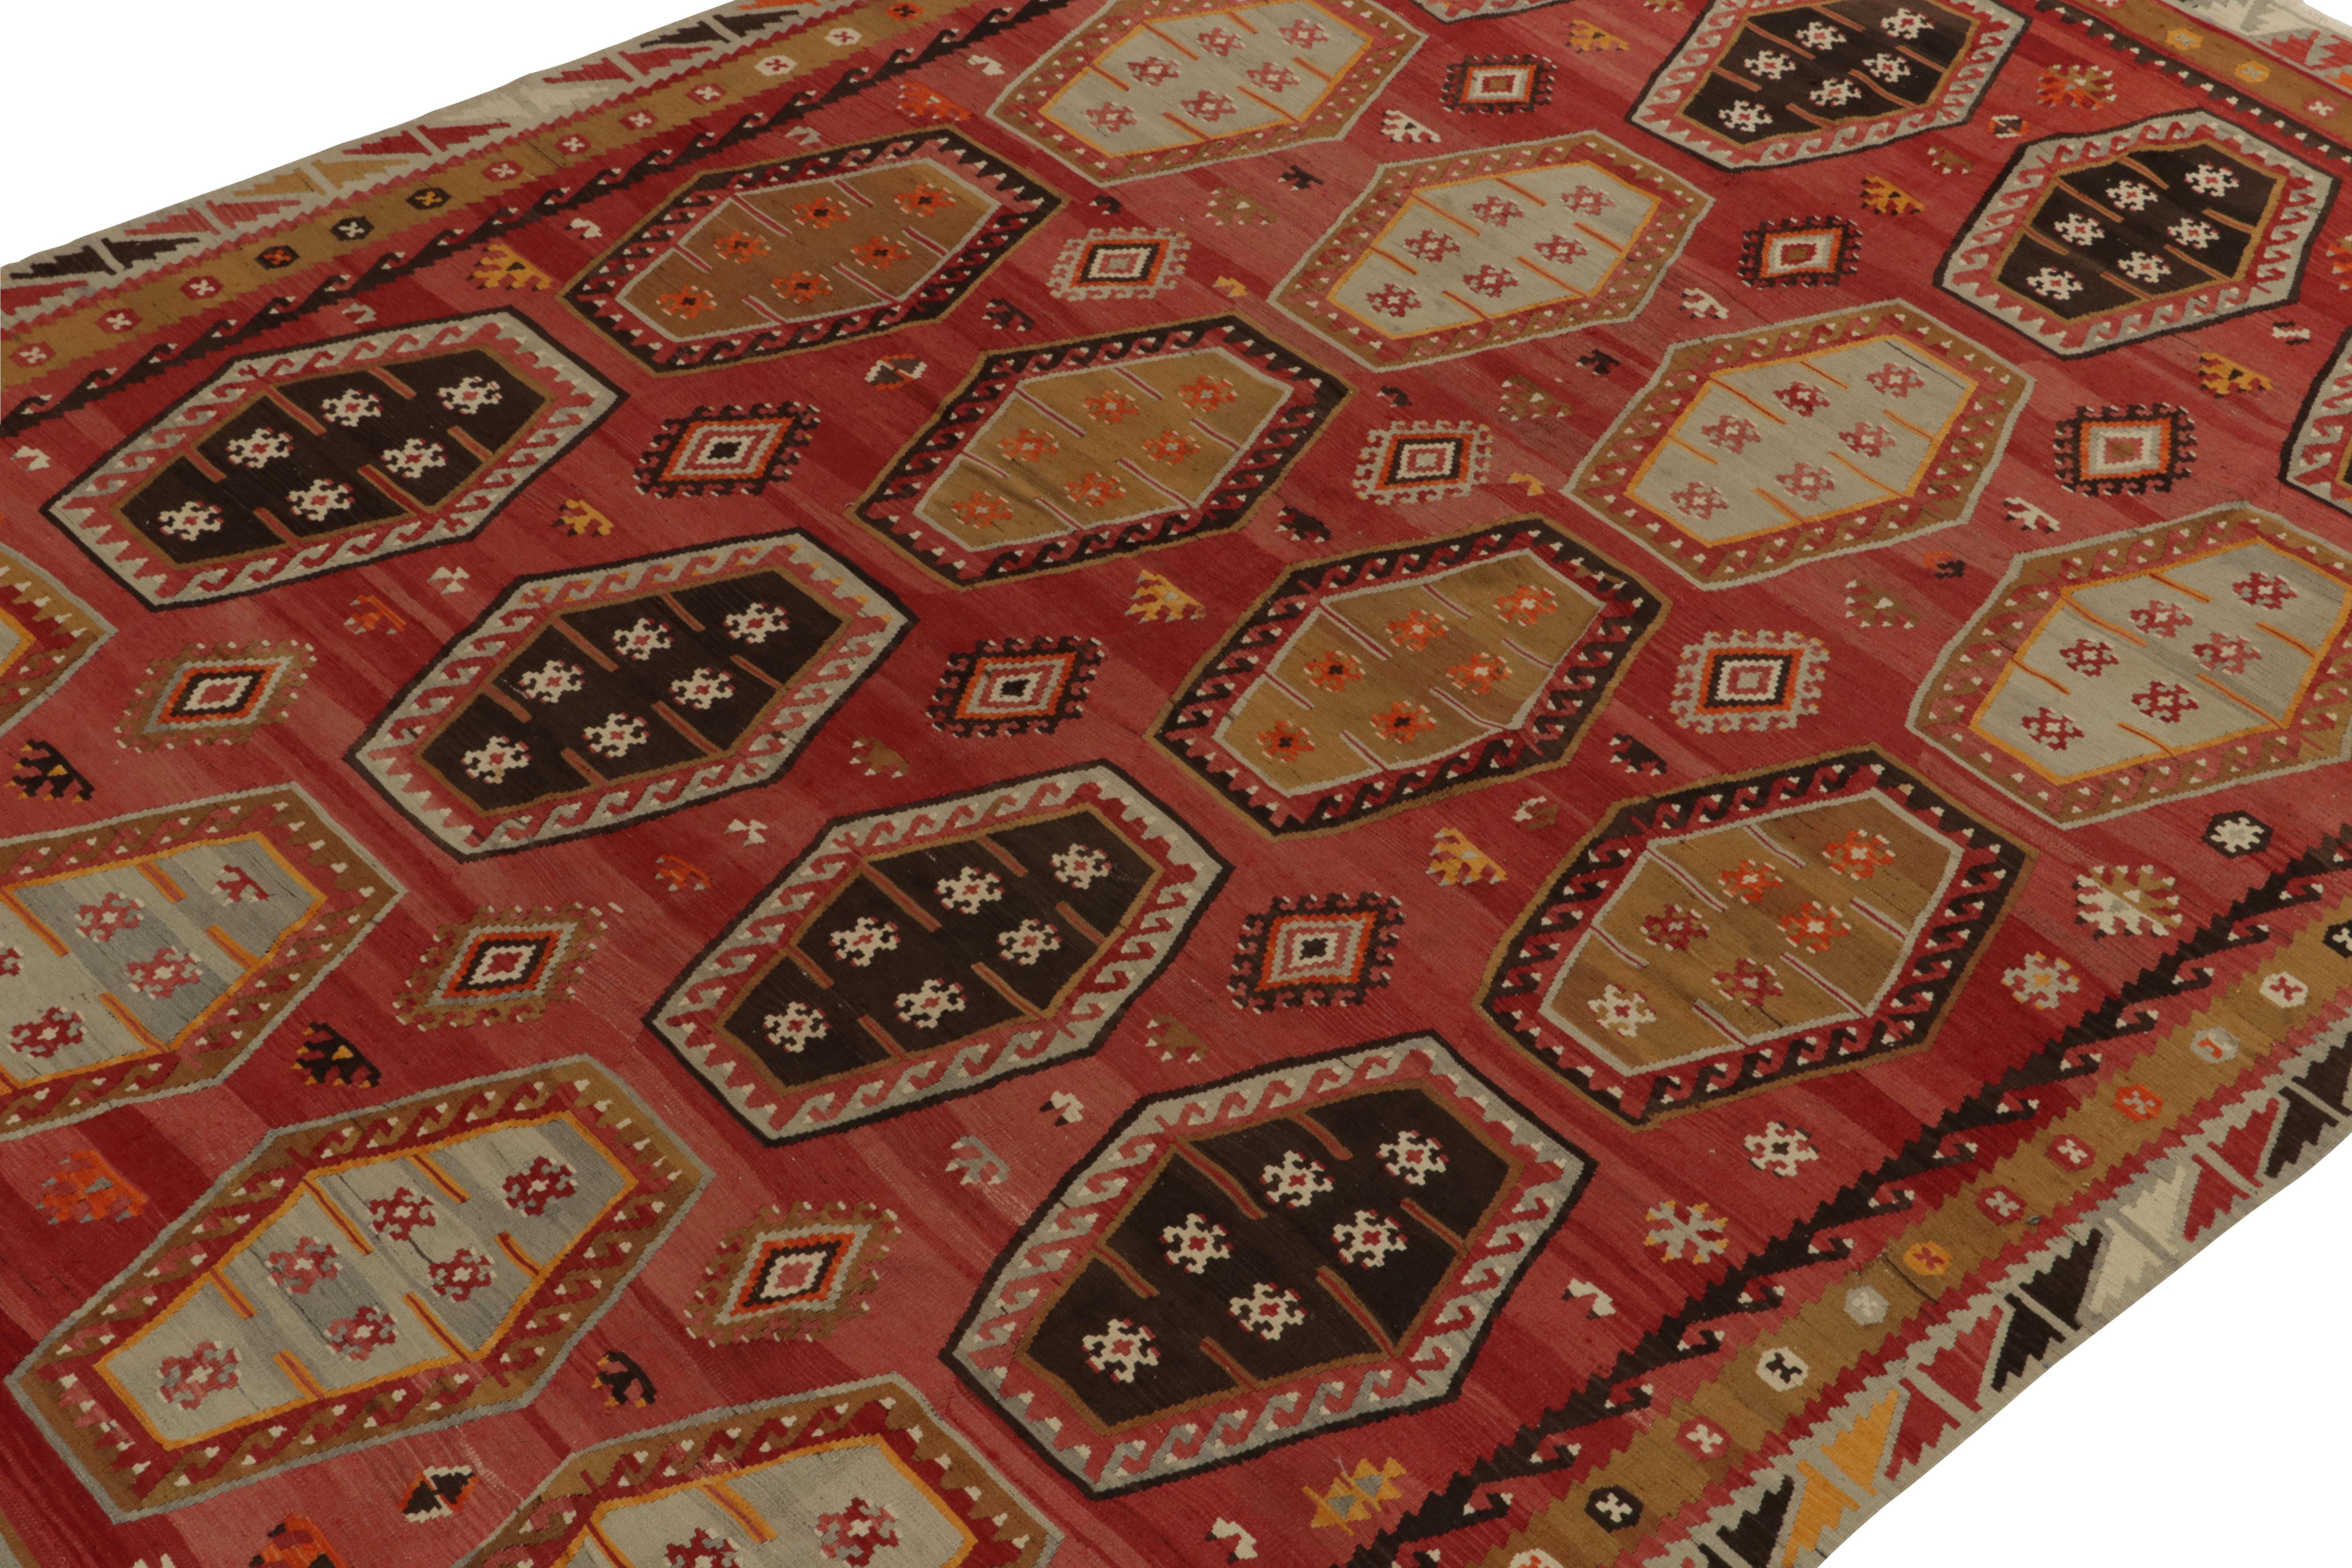 Vintage Turkish Kilim rug in Beige-Brown Tribal Geometric Pattern In Good Condition For Sale In Long Island City, NY